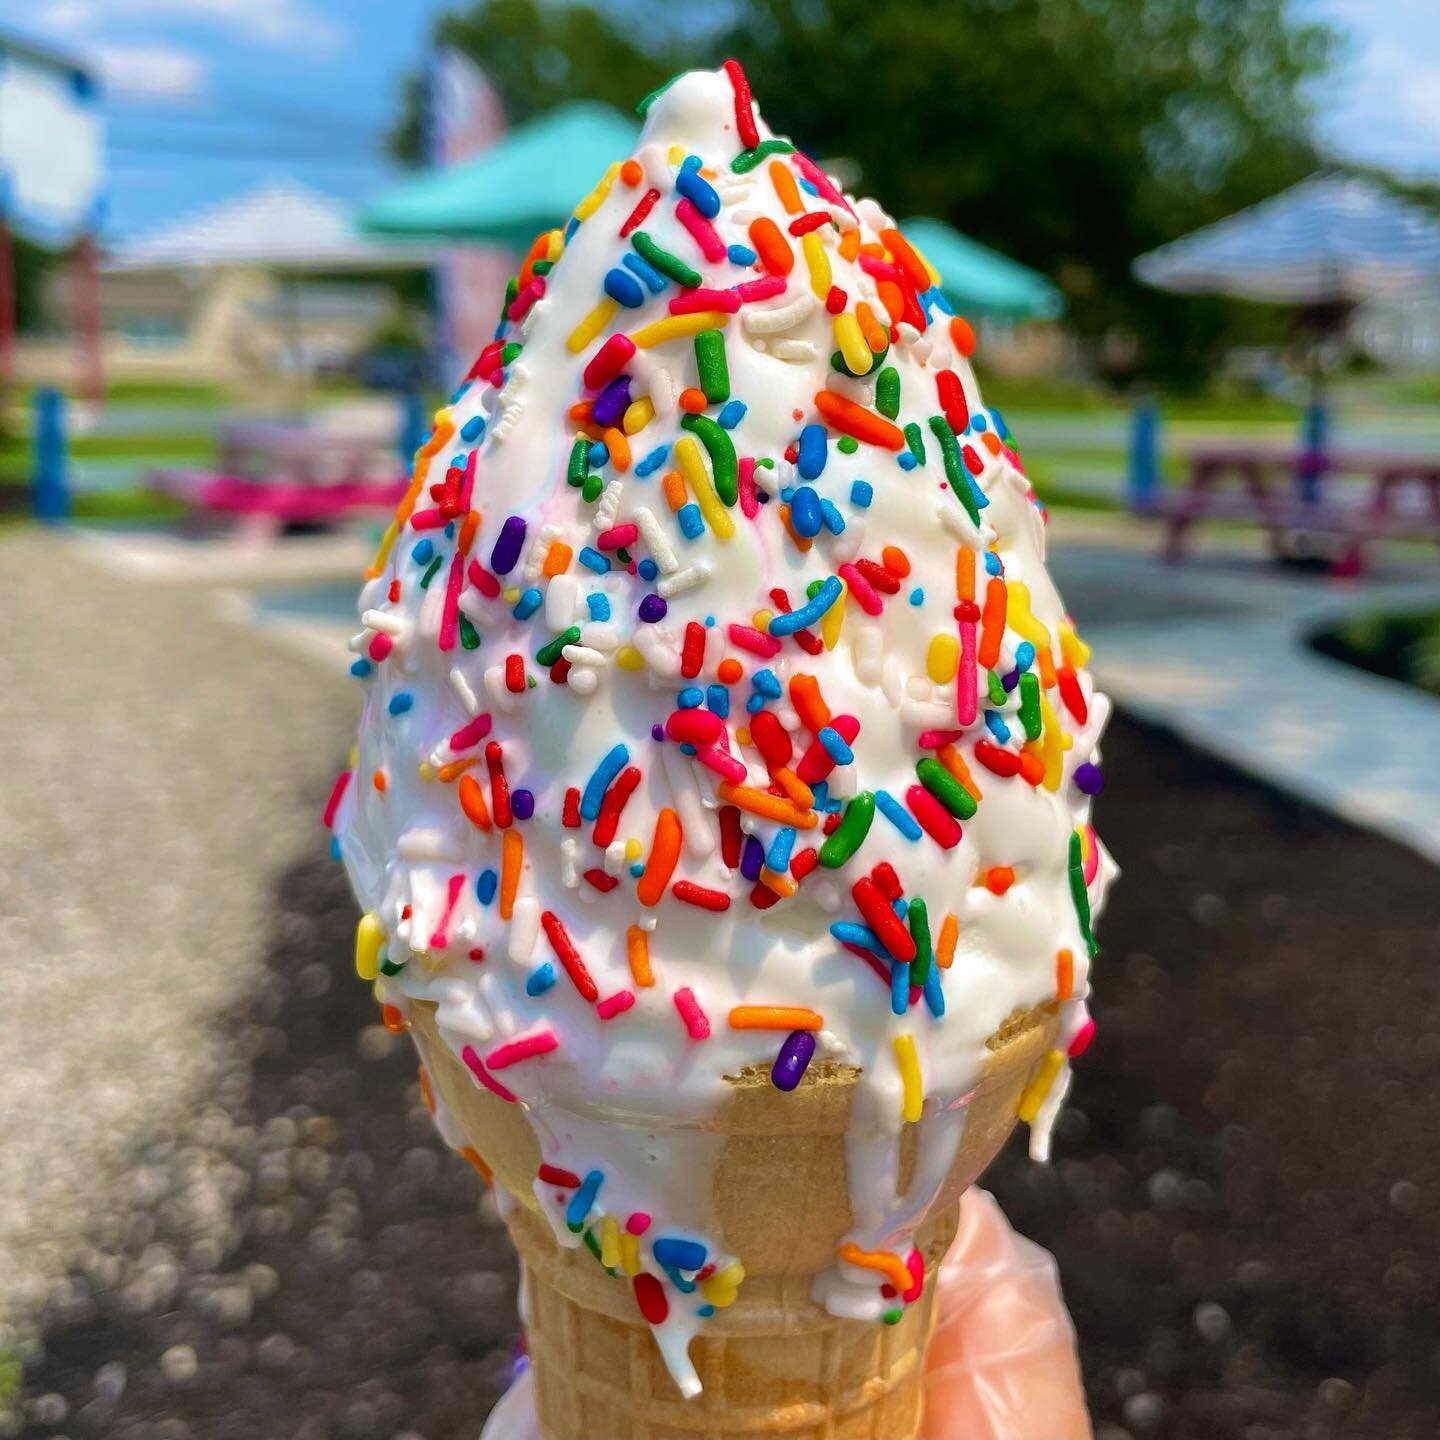 Don&rsquo;t let your ice cream melt while counting someone else&rsquo;s sprinkles
🍦✨
Open until 10pm tonight!
&bull;
&bull;
&bull;

#icecream #love #yum #icecreamaddict #icecreamlover #smallbiz #smallbusiness #shopsmall #shoplocal #newjersey #newjer